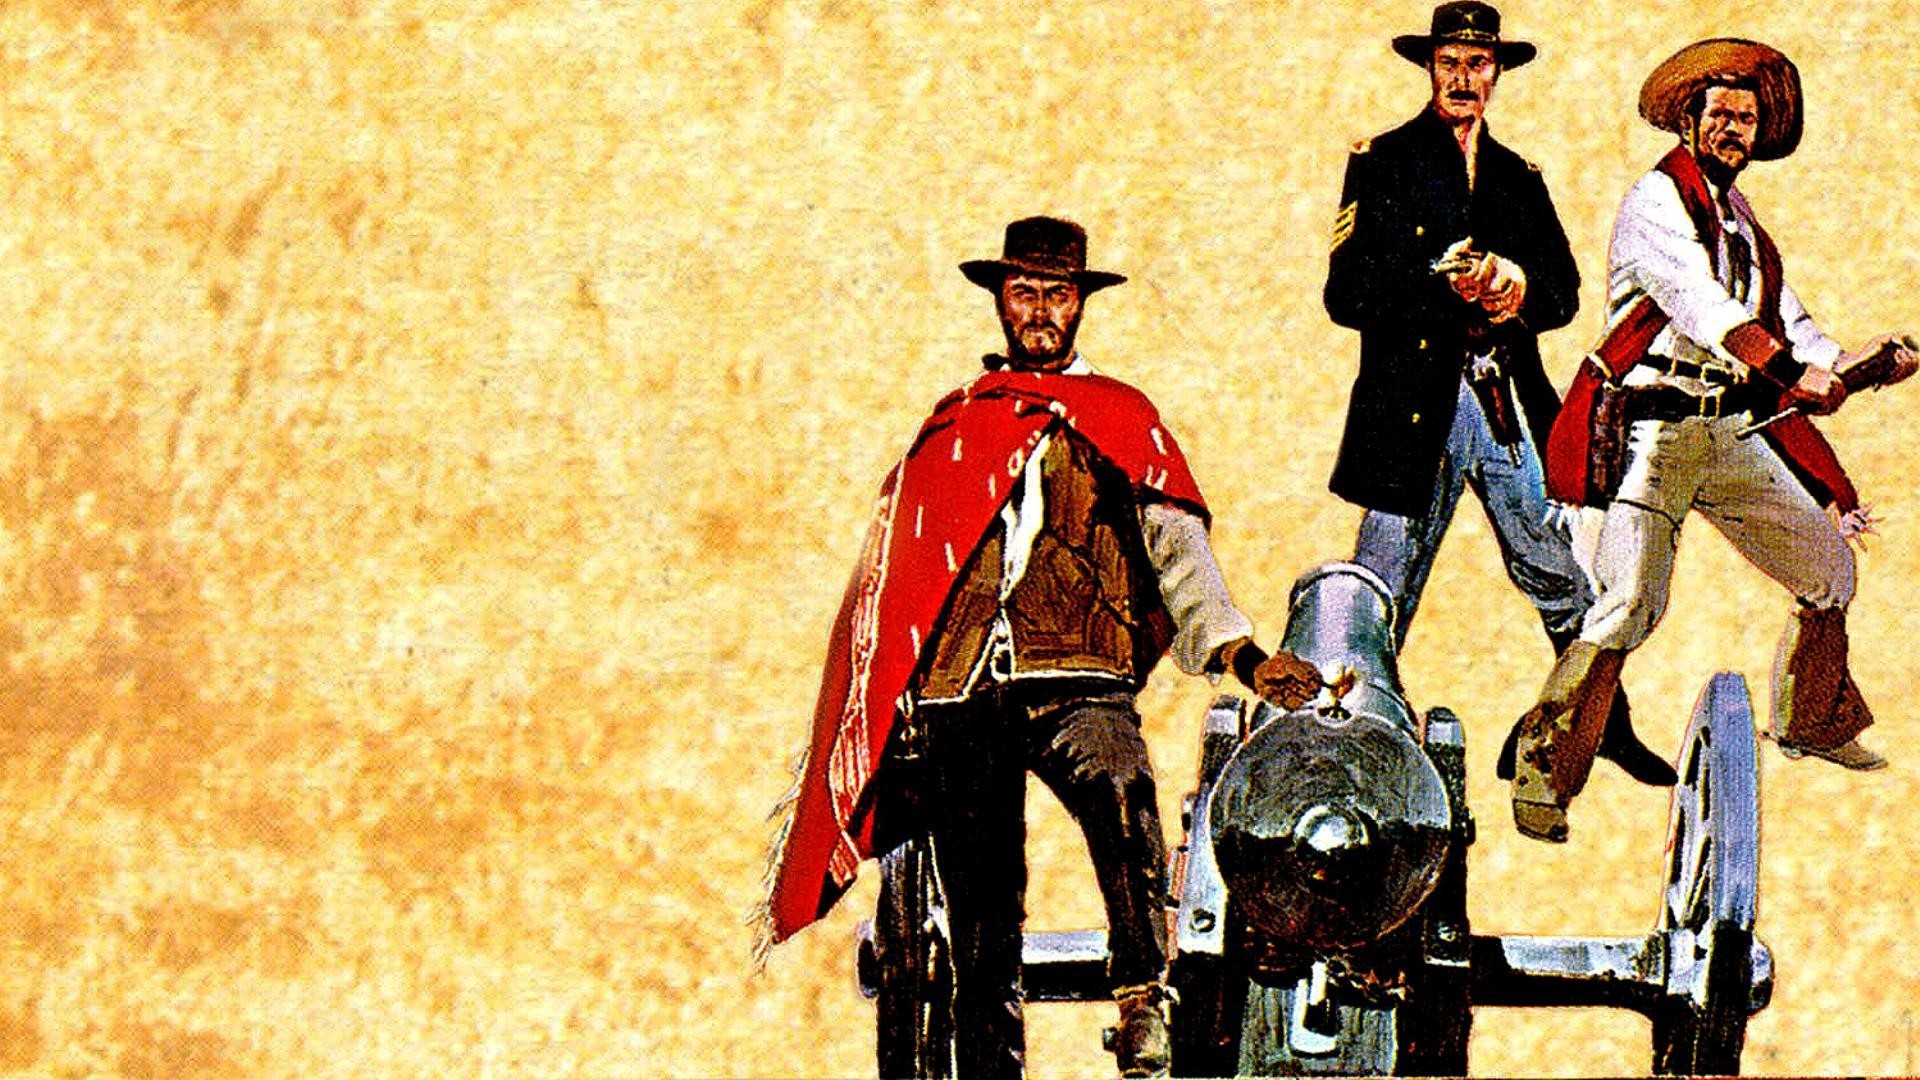 The Good the Bad and the Ugly Wallpaper - Bing images